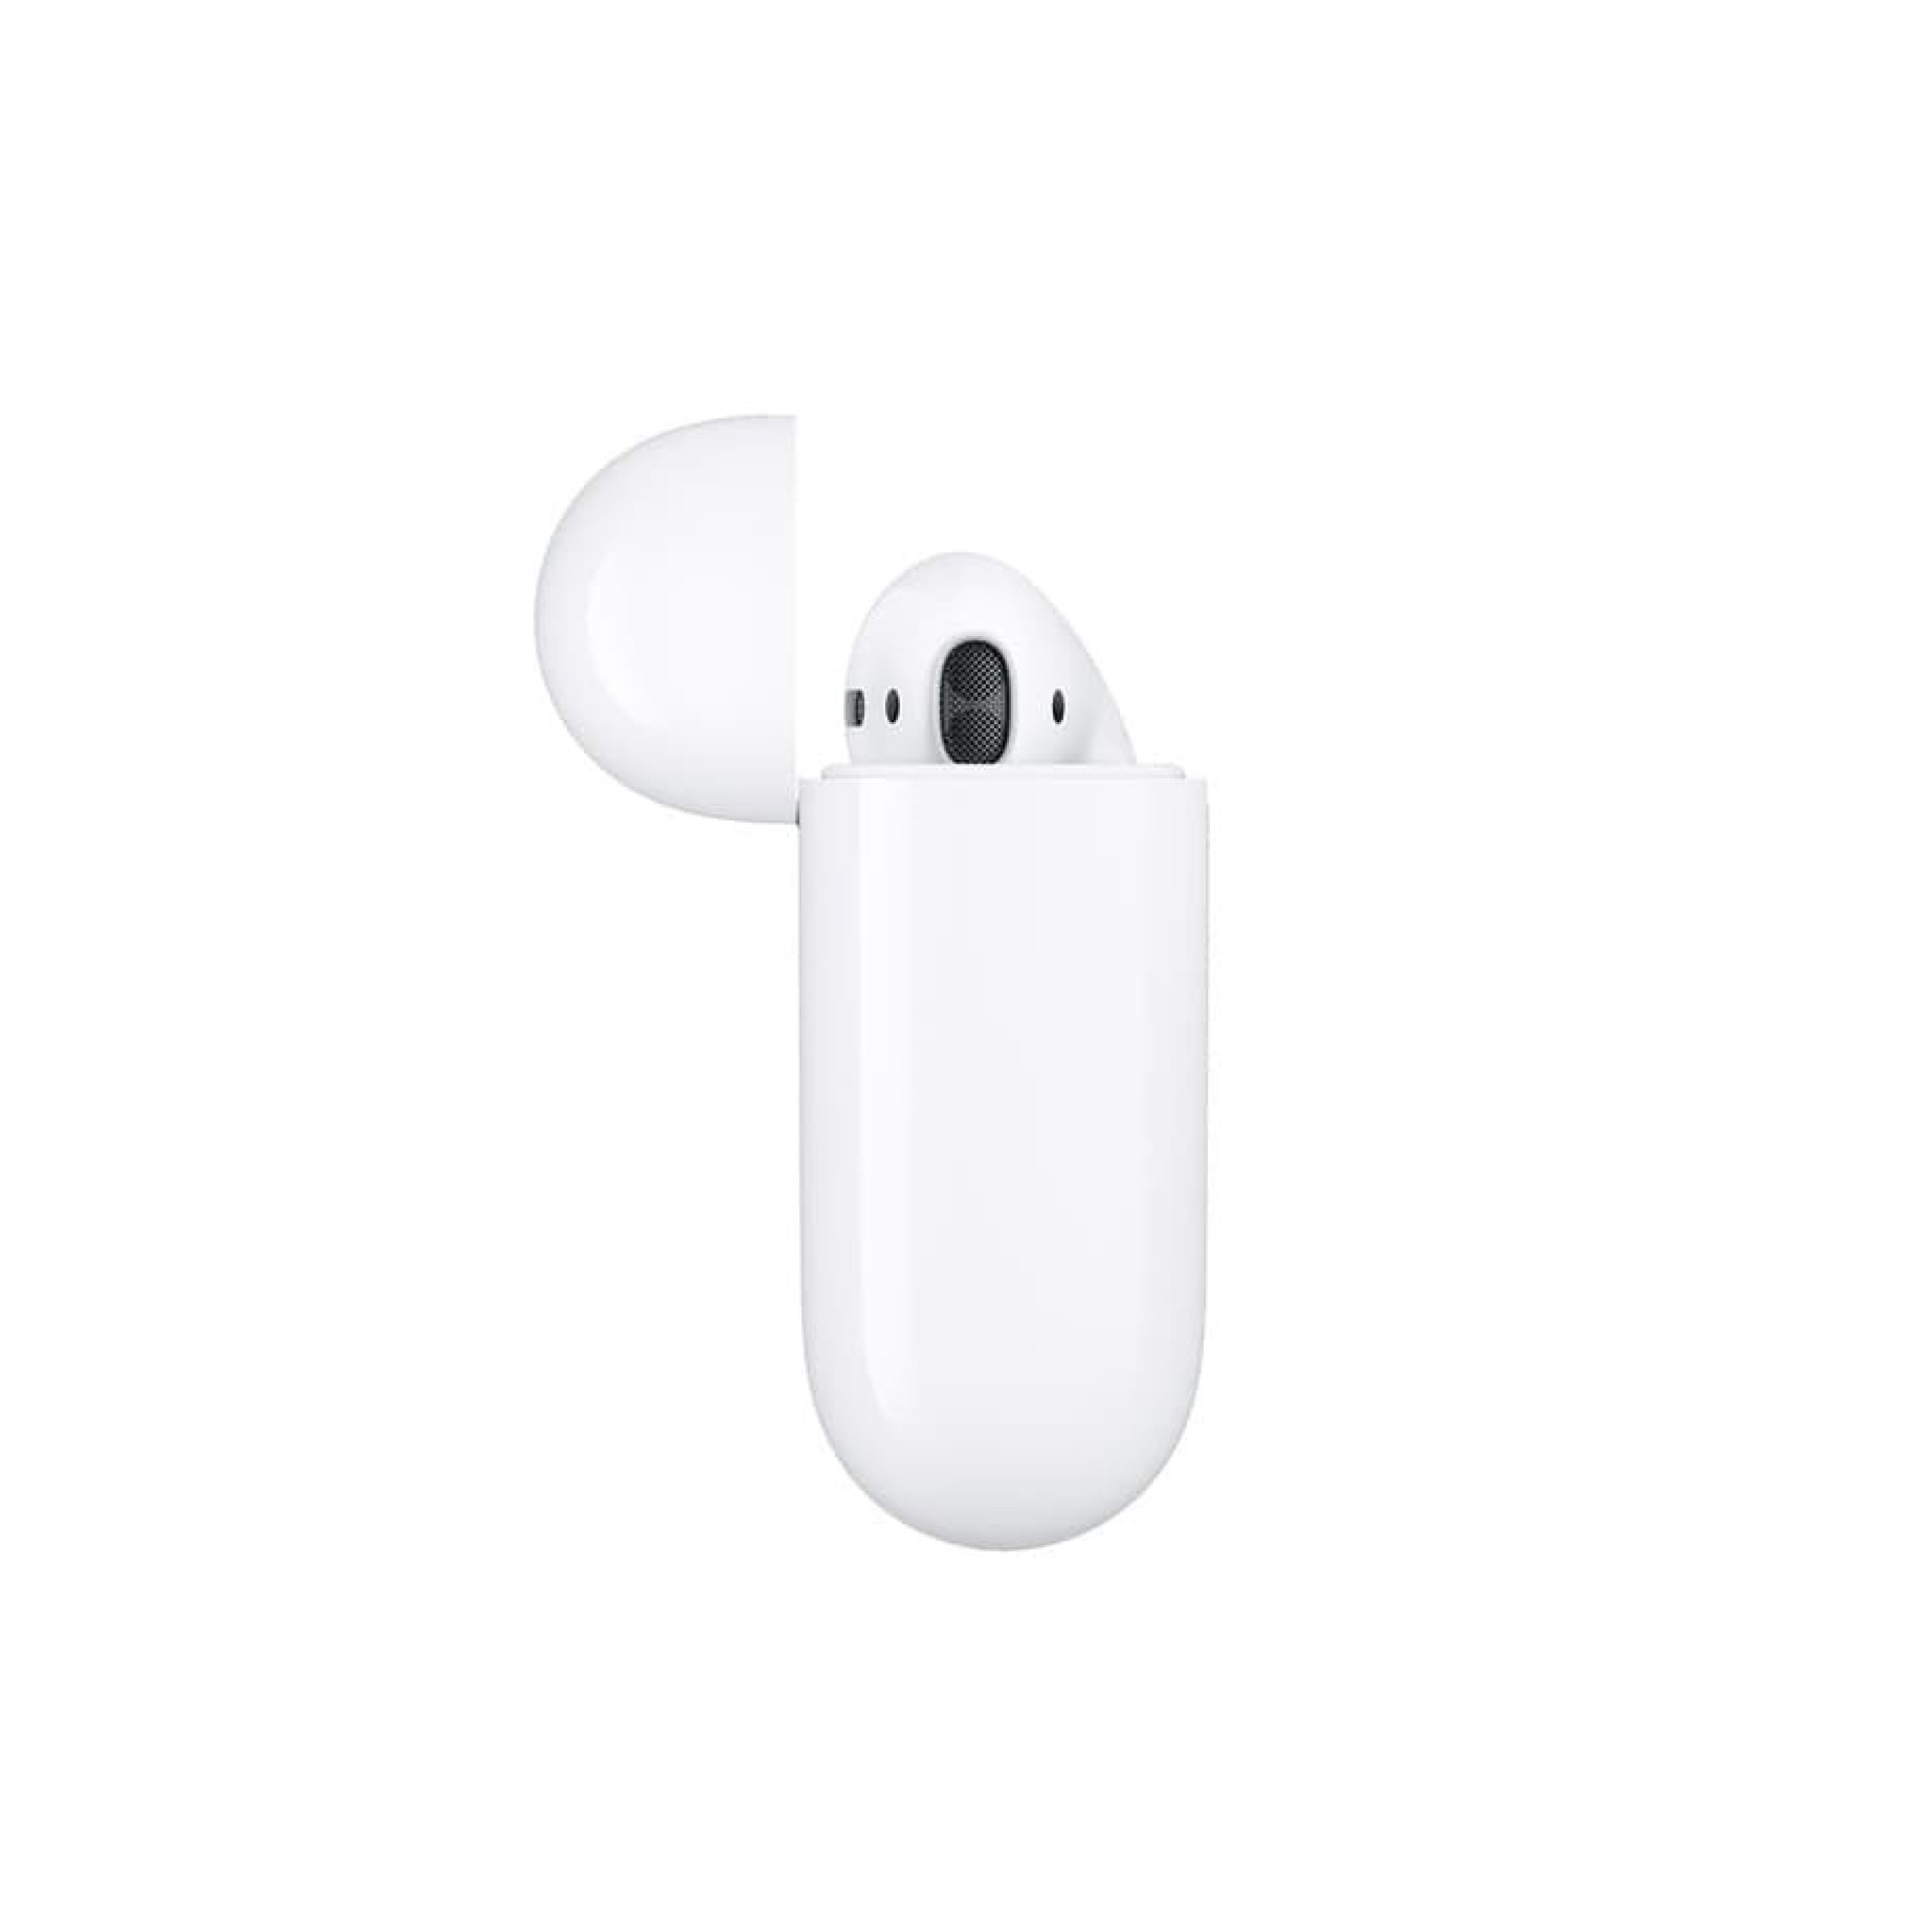 Apple Airpods 2 With Charging Case MV7N2 - White